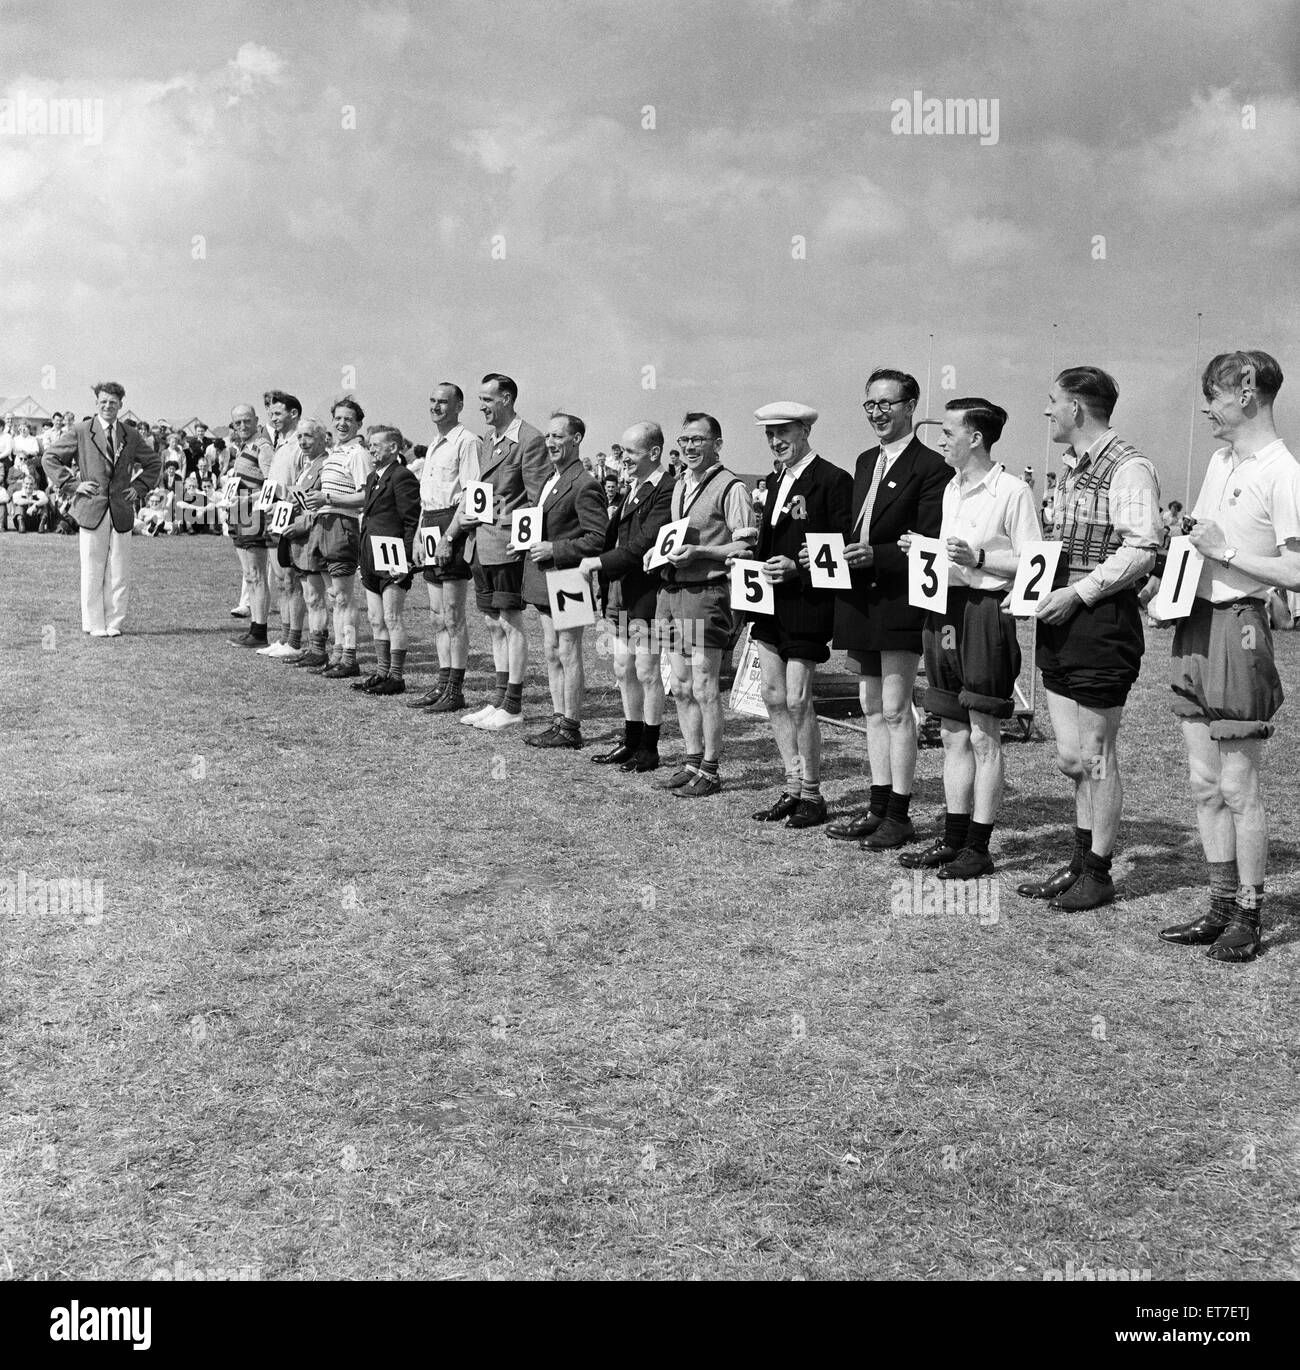 Knobbly Knees Contest, Butlins Holiday Camp, Filey, North Yorkshire. 30th July 1954. Stock Photo